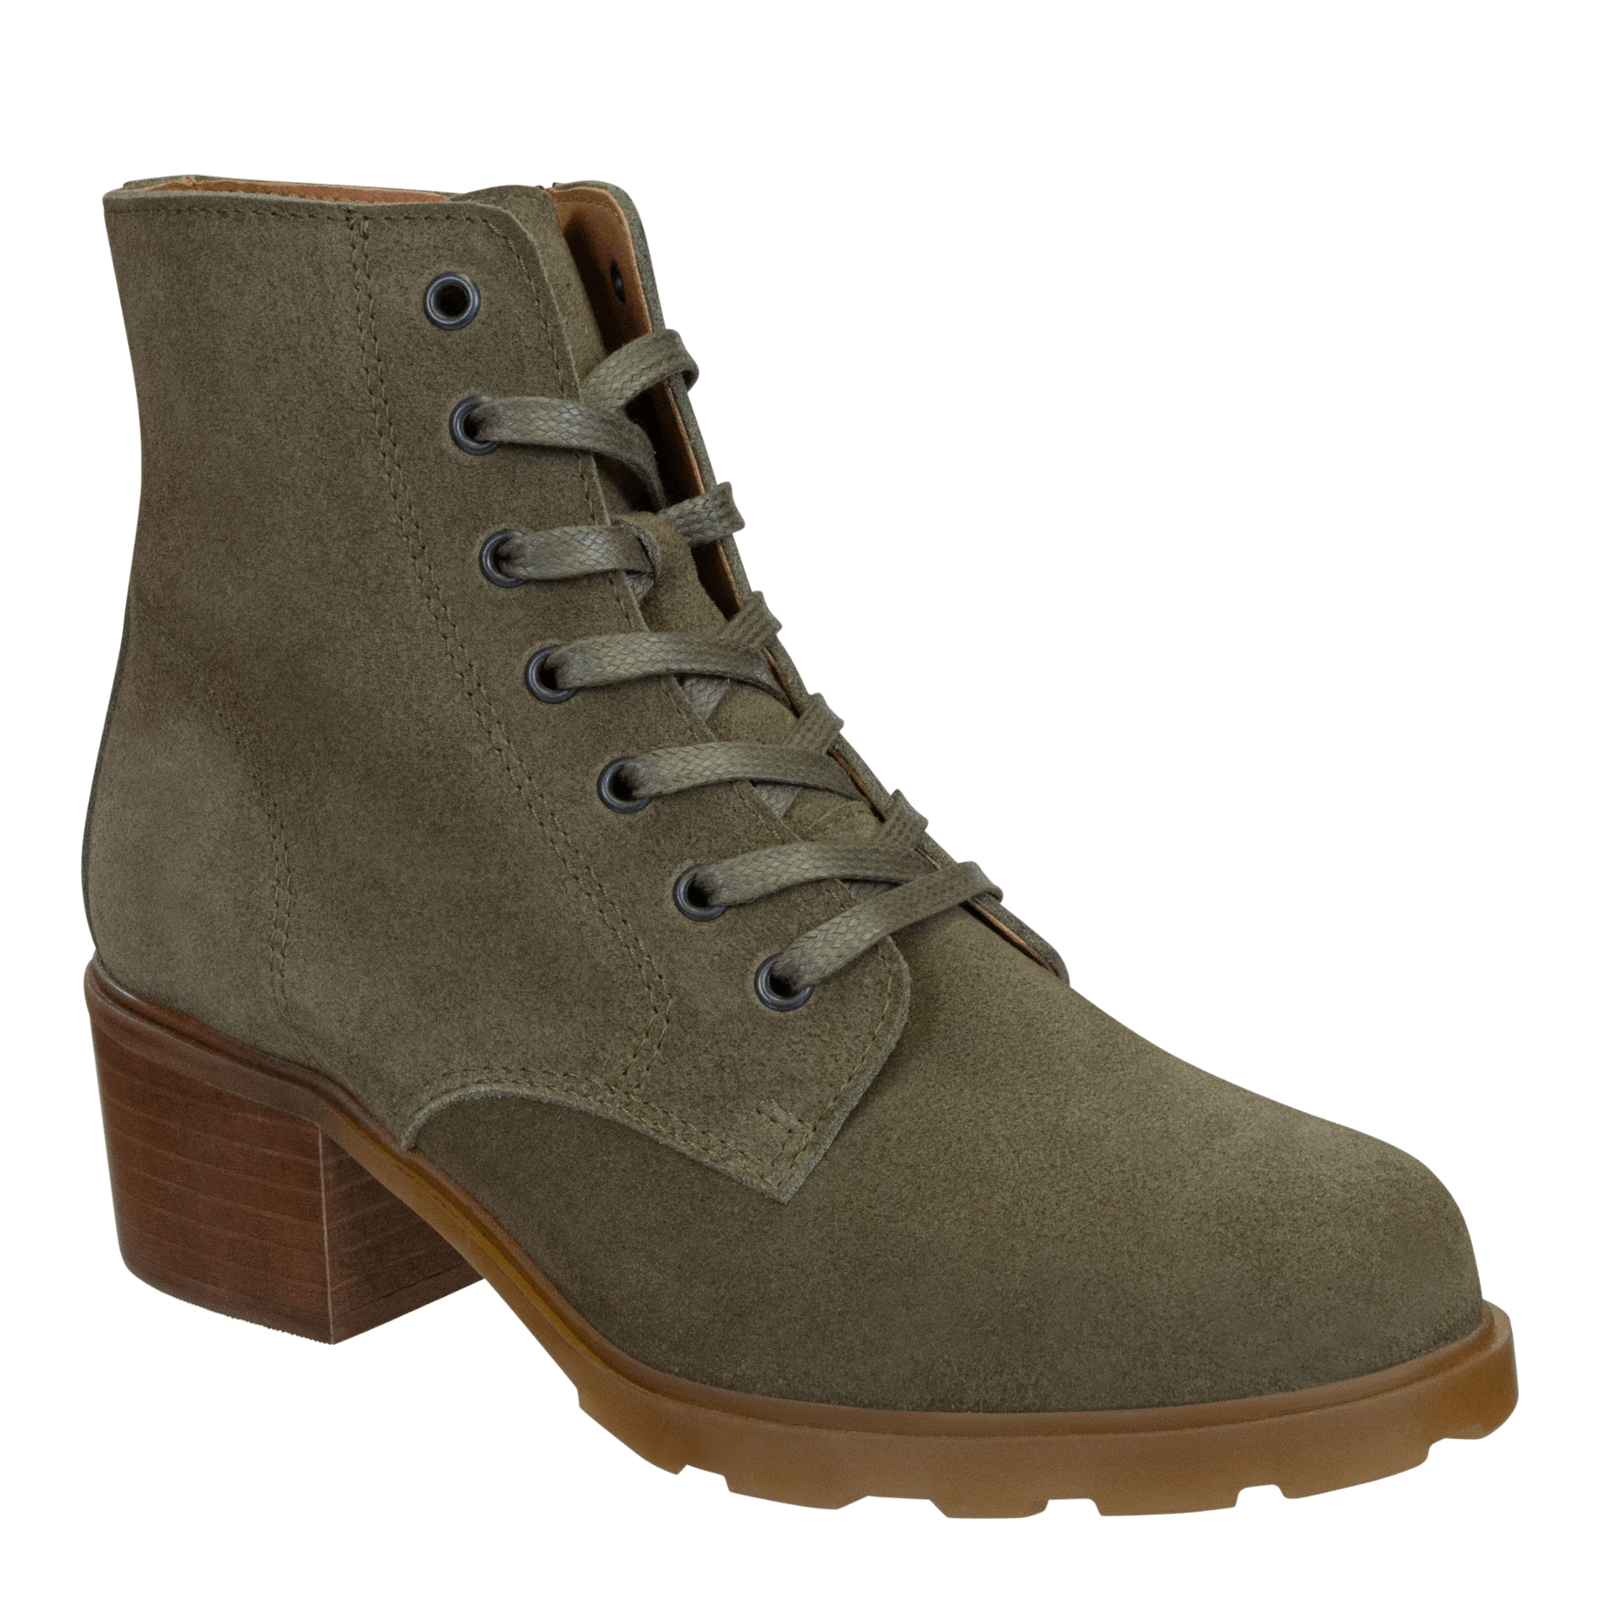 Women's Low Heel Lace-Up Ankle Boots Brown Serellia